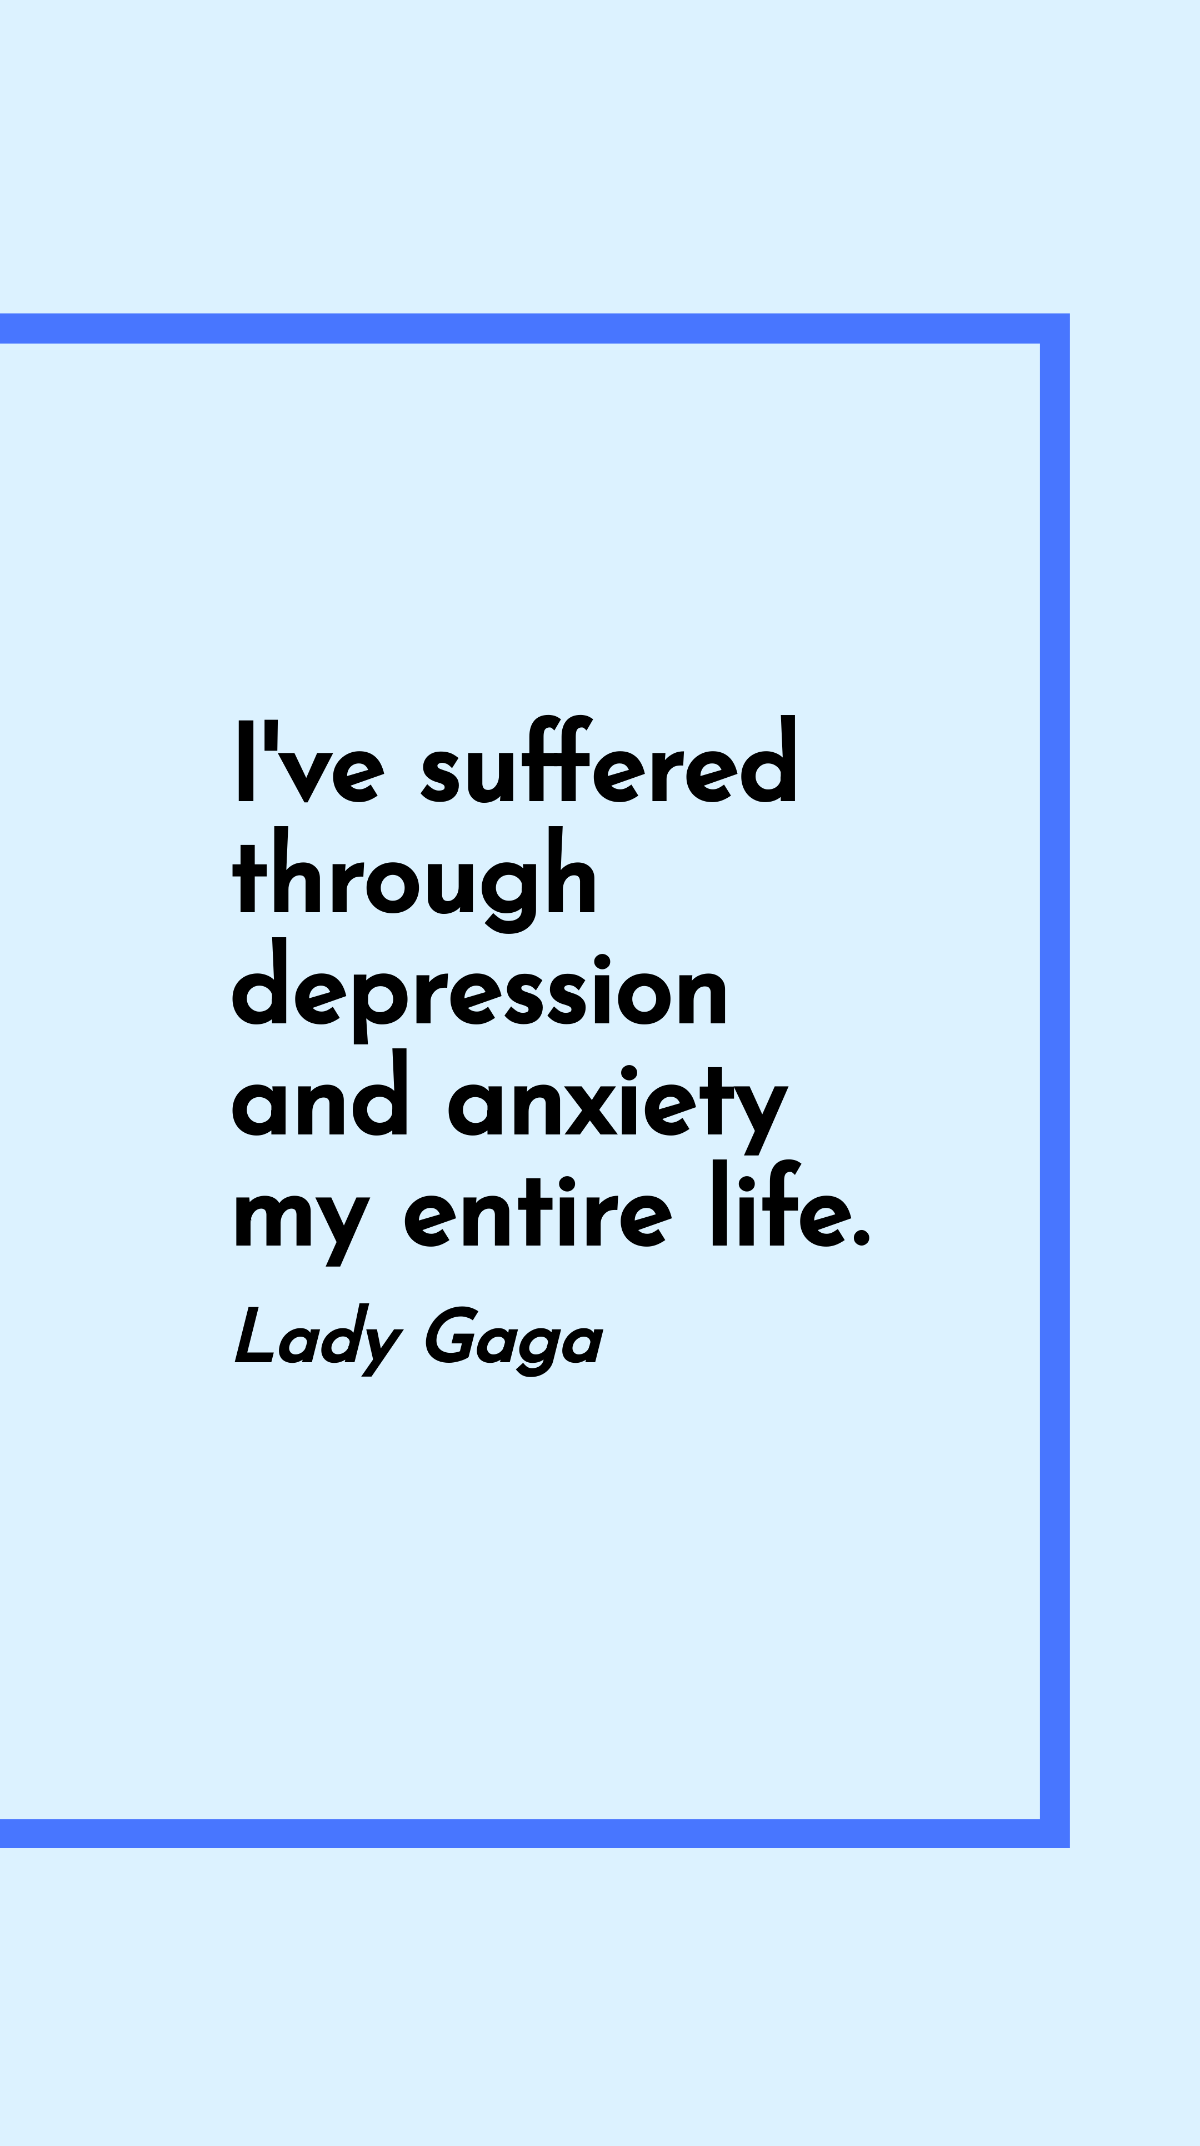 Lady Gaga - I've suffered through depression and anxiety my entire life. Template